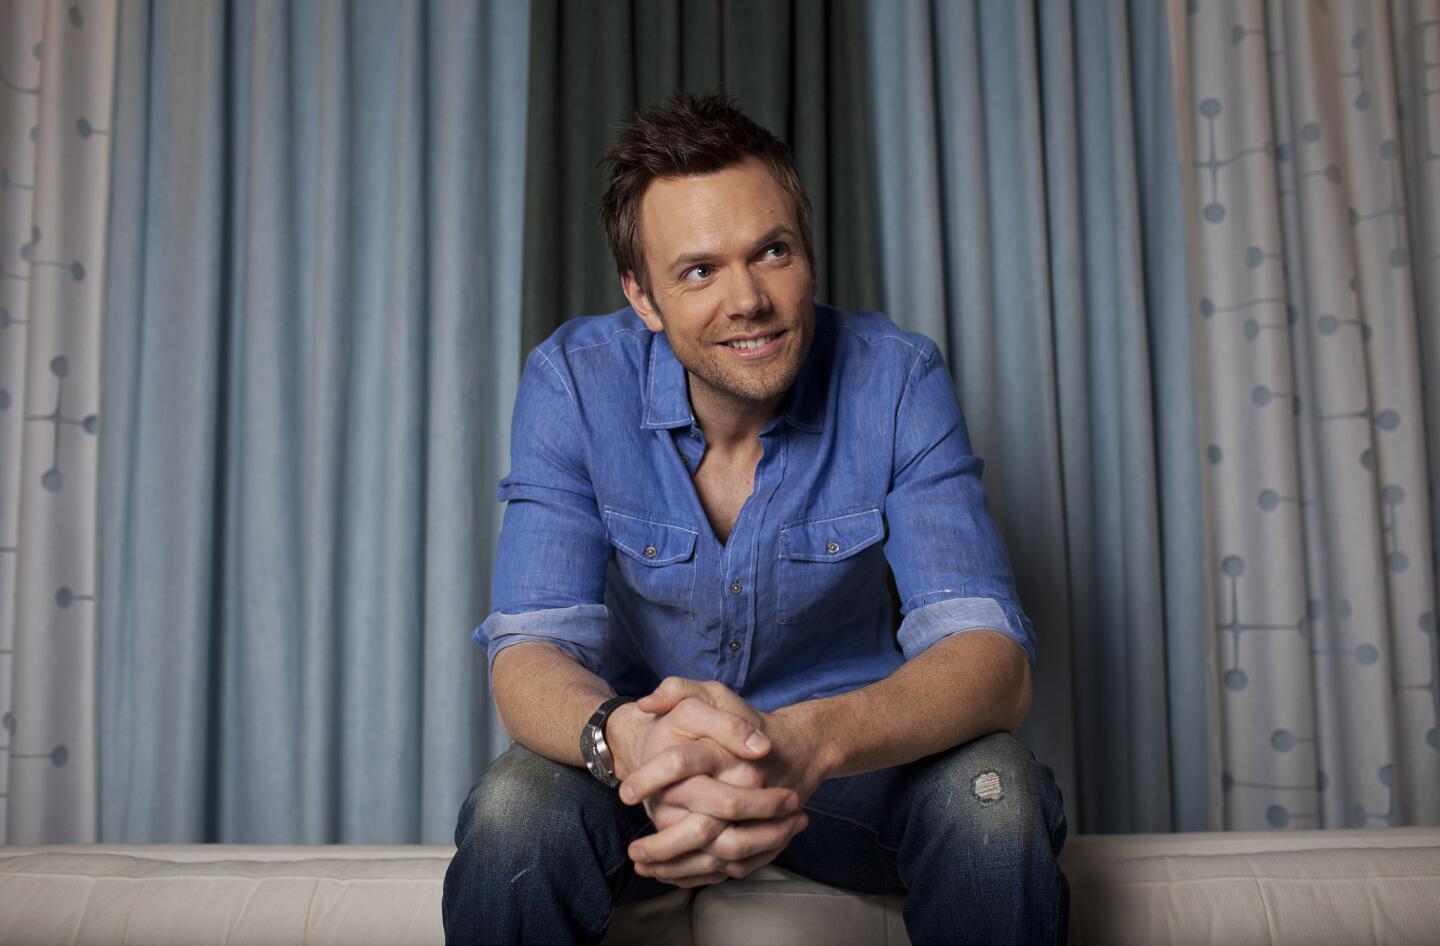 Joel McHale this year is nominated for a short-format live-action entertainment program Emmy Award for E!'s "The Soup."